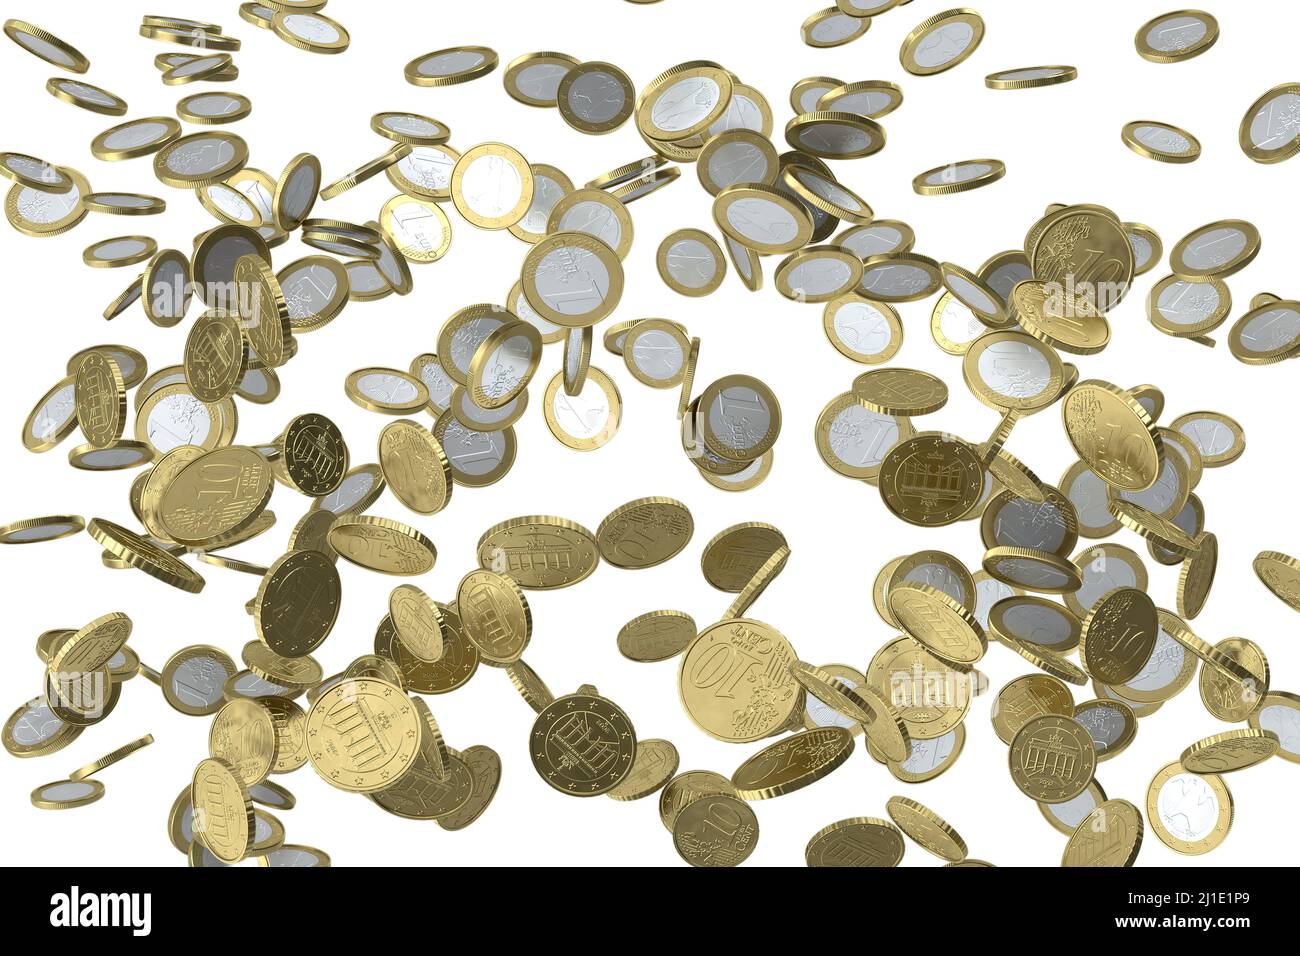 Concept idea of lots falling/dropping euro coins, to represent a poor European economy or devaluation of European money that could cause a depression. Stock Photo